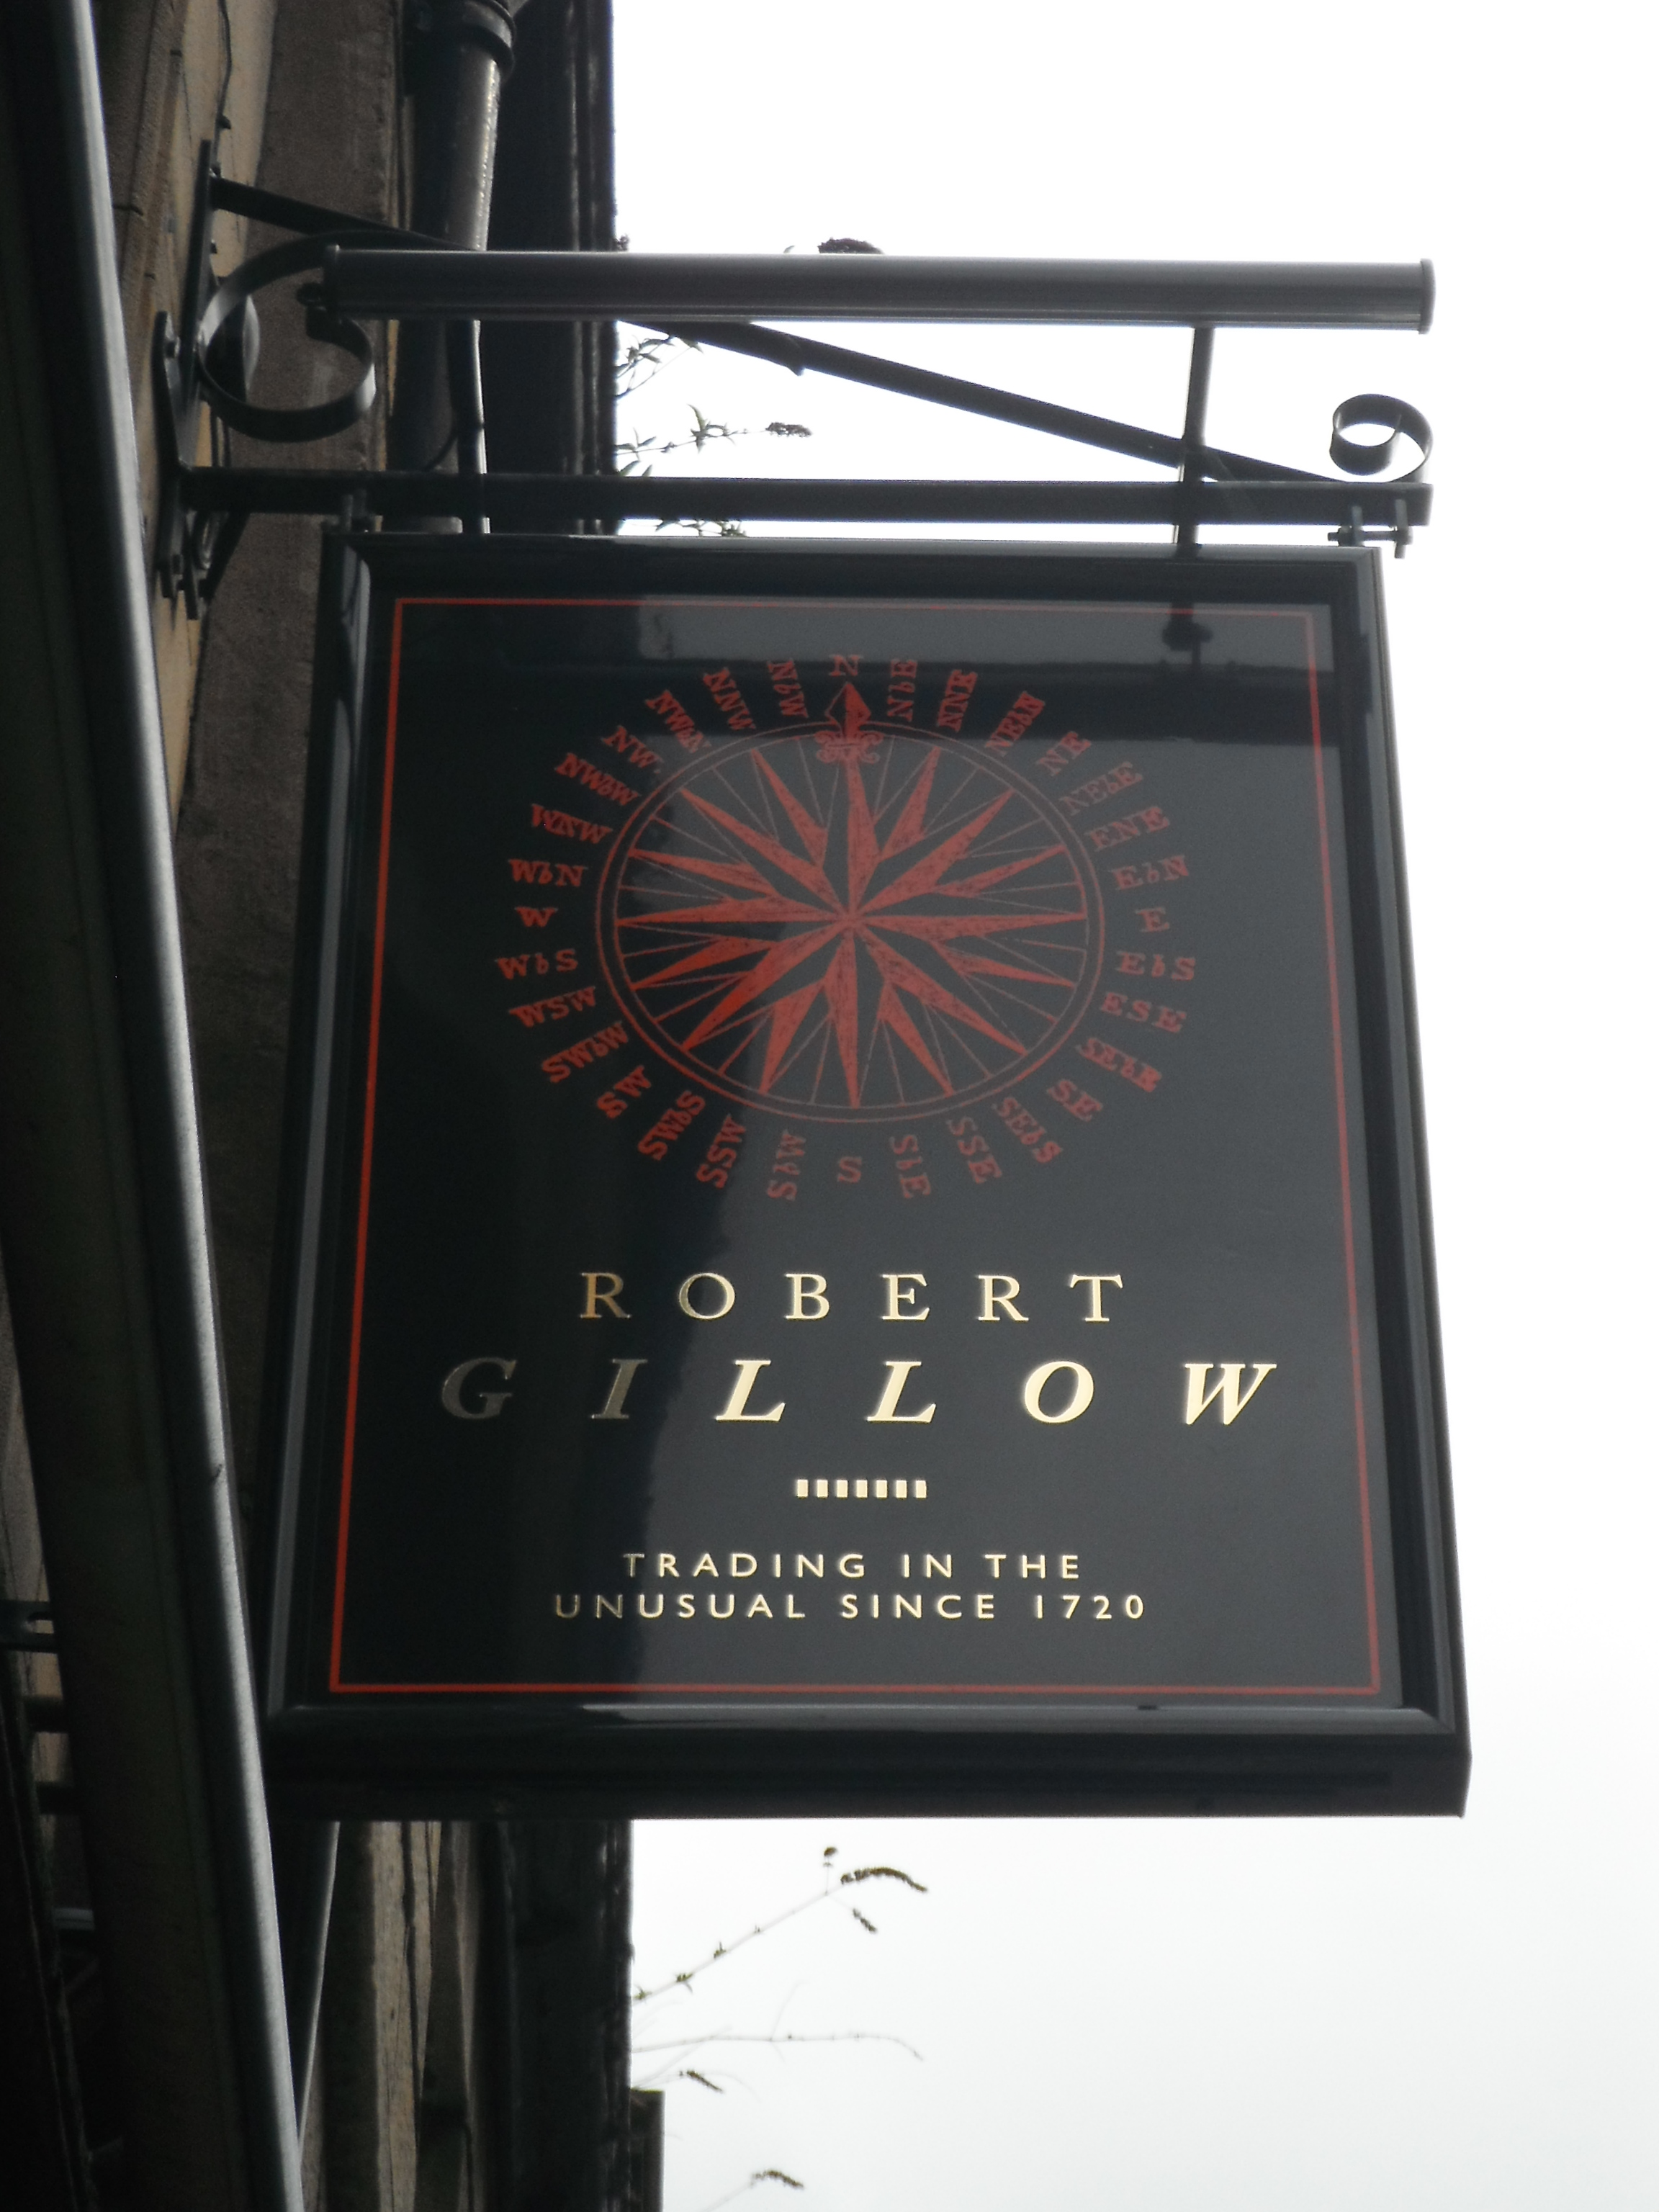 photo taken by me - The Robert Gillow pub sign, Lancaster 